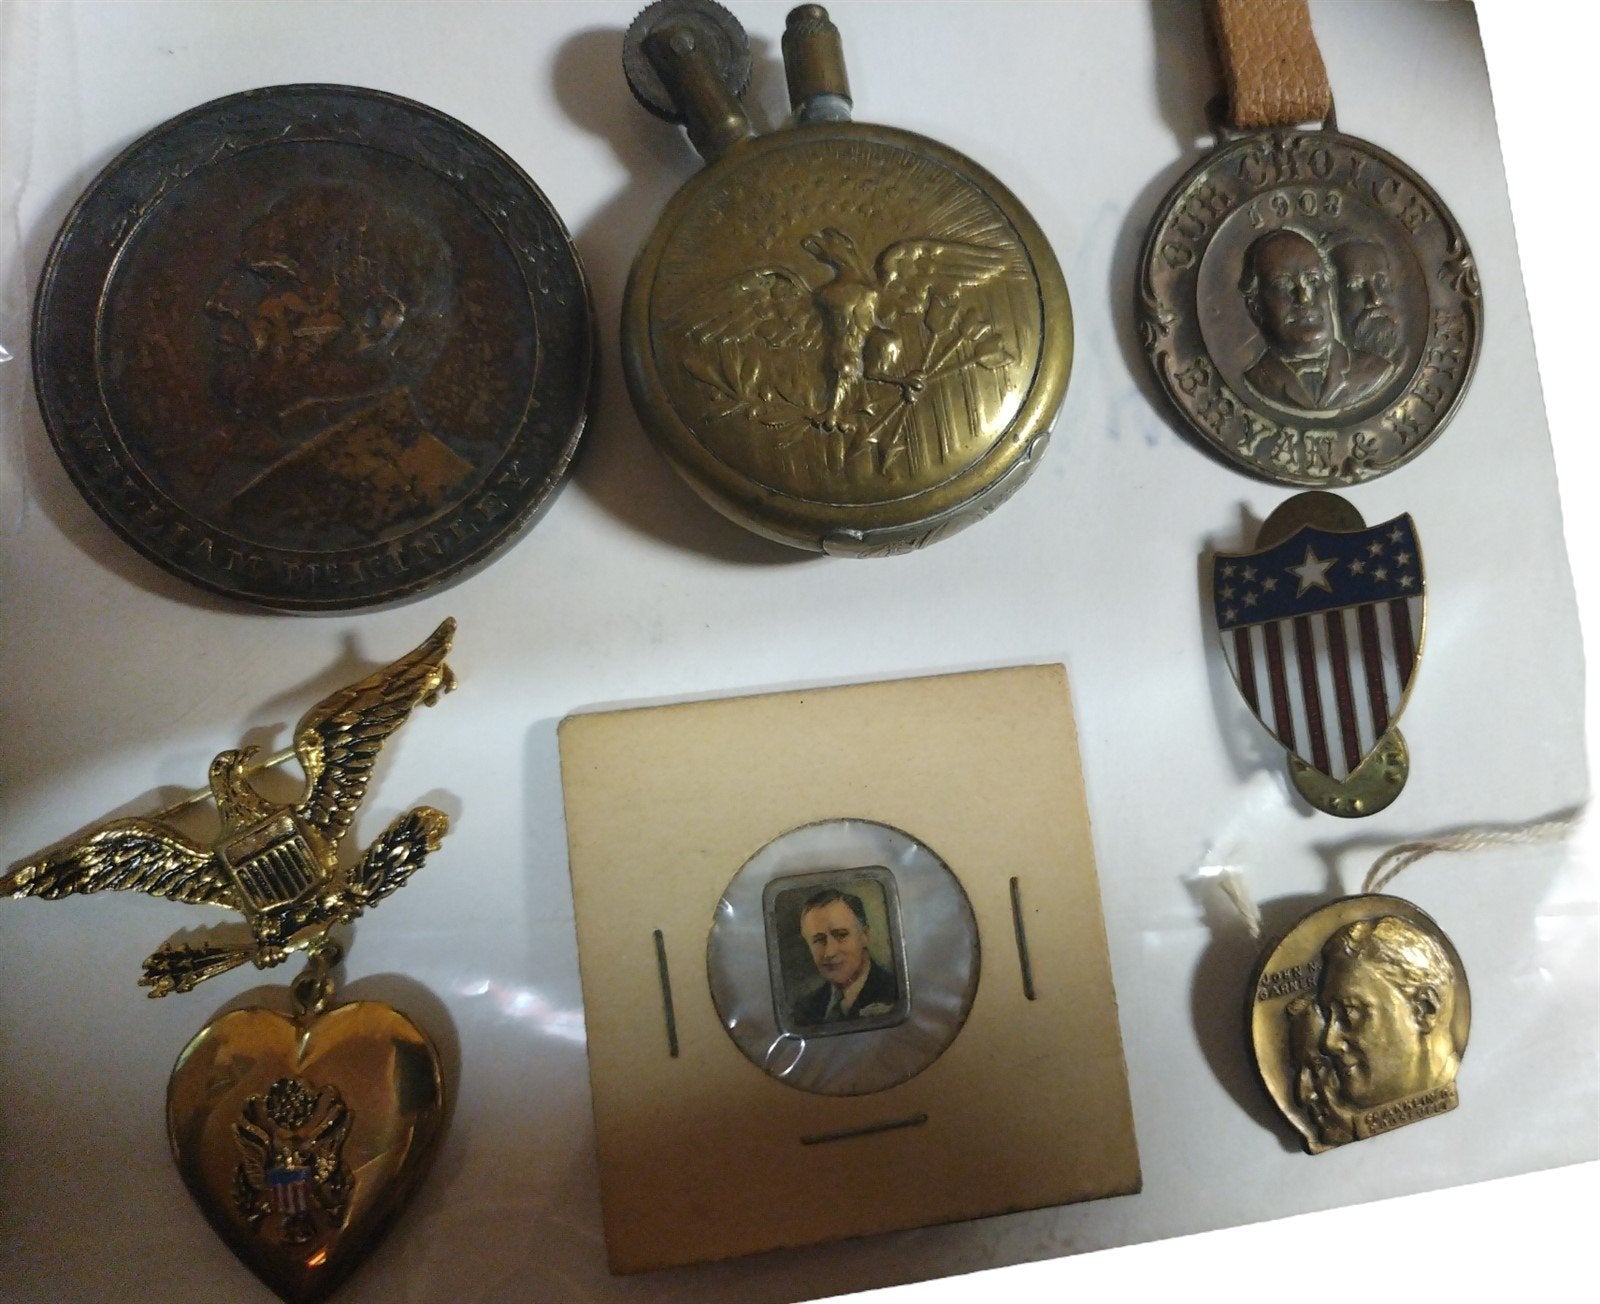 Vintage/Antique Collection of US Military & Historical Pins, Coins, Memorabilia